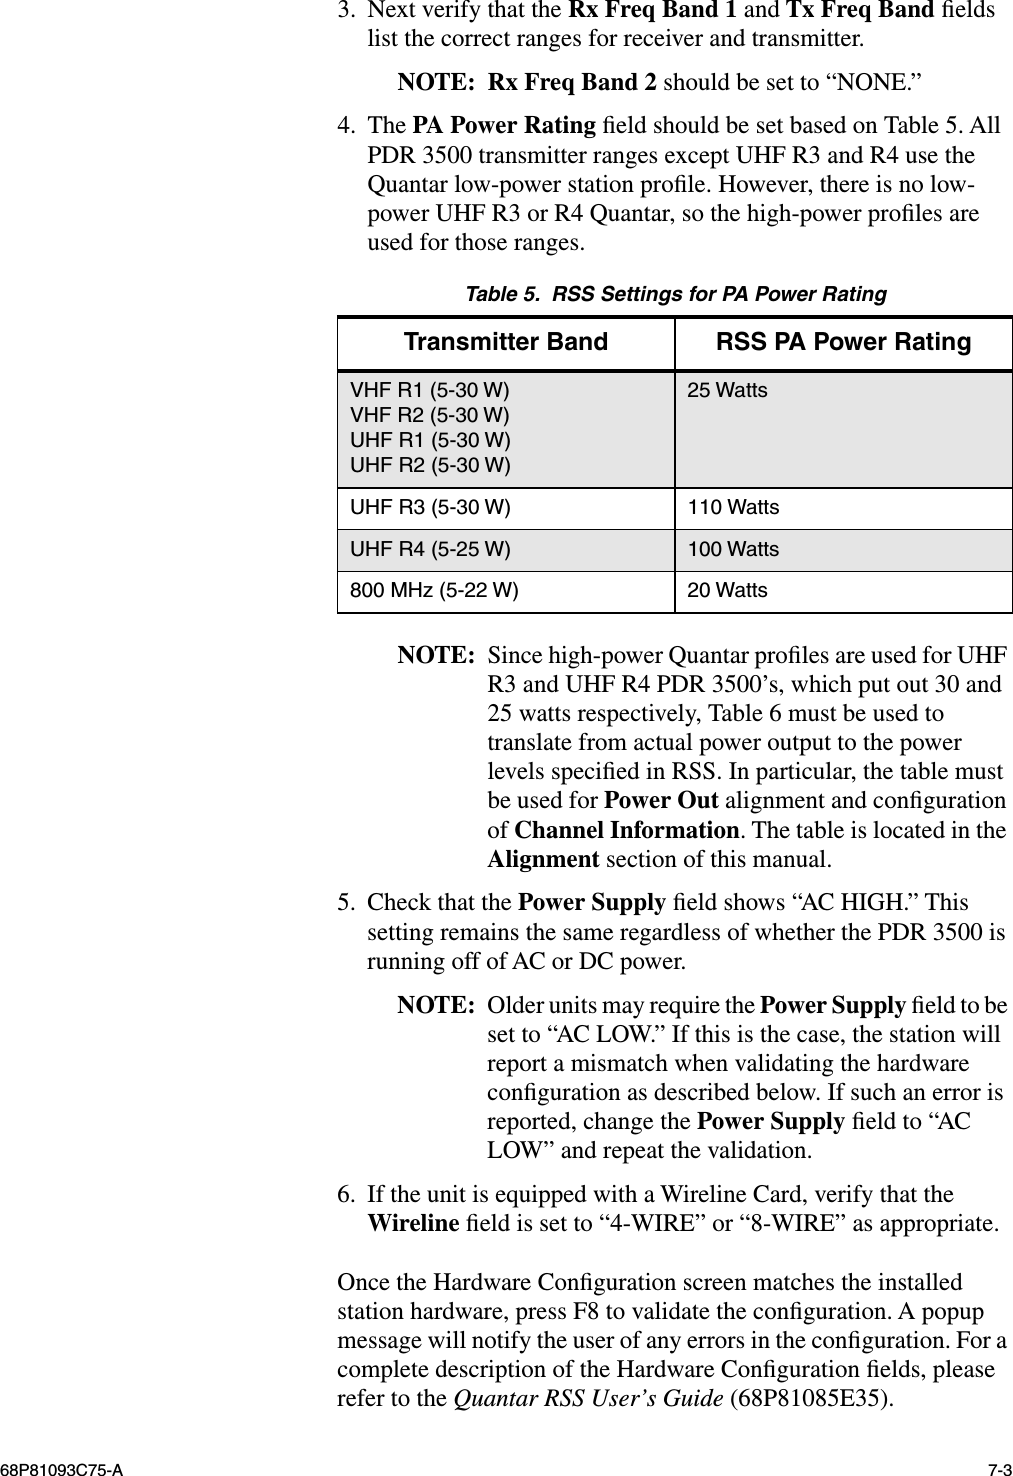  68P81093C75-A 7-3 3. Next verify that the  Rx Freq Band 1  and  Tx Freq Band  ﬁelds list the correct ranges for receiver and transmitter. NOTE: Rx Freq Band 2  should be set to “NONE.”4. The  PA Power Rating  ﬁeld should be set based on Table 5. All PDR 3500 transmitter ranges except UHF R3 and R4 use the Quantar low-power station proﬁle. However, there is no low-power UHF R3 or R4 Quantar, so the high-power proﬁles are used for those ranges. NOTE: Since high-power Quantar proﬁles are used for UHF R3 and UHF R4 PDR 3500’s, which put out 30 and 25 watts respectively, Table 6 must be used to translate from actual power output to the power levels speciﬁed in RSS. In particular, the table must be used for  Power Out  alignment and conﬁguration of  Channel Information . The table is located in the  Alignment  section of this manual.5. Check that the  Power Supply  ﬁeld shows “AC HIGH.” This setting remains the same regardless of whether the PDR 3500 is running off of AC or DC power. NOTE: Older units may require the  Power Supply  ﬁeld to be set to “AC LOW.” If this is the case, the station will report a mismatch when validating the hardware conﬁguration as described below. If such an error is reported, change the  Power Supply  ﬁeld to “AC LOW” and repeat the validation.6. If the unit is equipped with a Wireline Card, verify that the  Wireline  ﬁeld is set to “4-WIRE” or “8-WIRE” as appropriate.Once the Hardware Conﬁguration screen matches the installed station hardware, press F8 to validate the conﬁguration. A popup message will notify the user of any errors in the conﬁguration. For a complete description of the Hardware Conﬁguration ﬁelds, please refer to the  Quantar RSS User’s Guide  (68P81085E35). Table 5.  RSS Settings for PA Power Rating Transmitter Band RSS PA Power Rating VHF R1 (5-30 W)VHF R2 (5-30 W)UHF R1 (5-30 W)UHF R2 (5-30 W)25 WattsUHF R3 (5-30 W) 110 WattsUHF R4 (5-25 W) 100 Watts800 MHz (5-22 W) 20 Watts